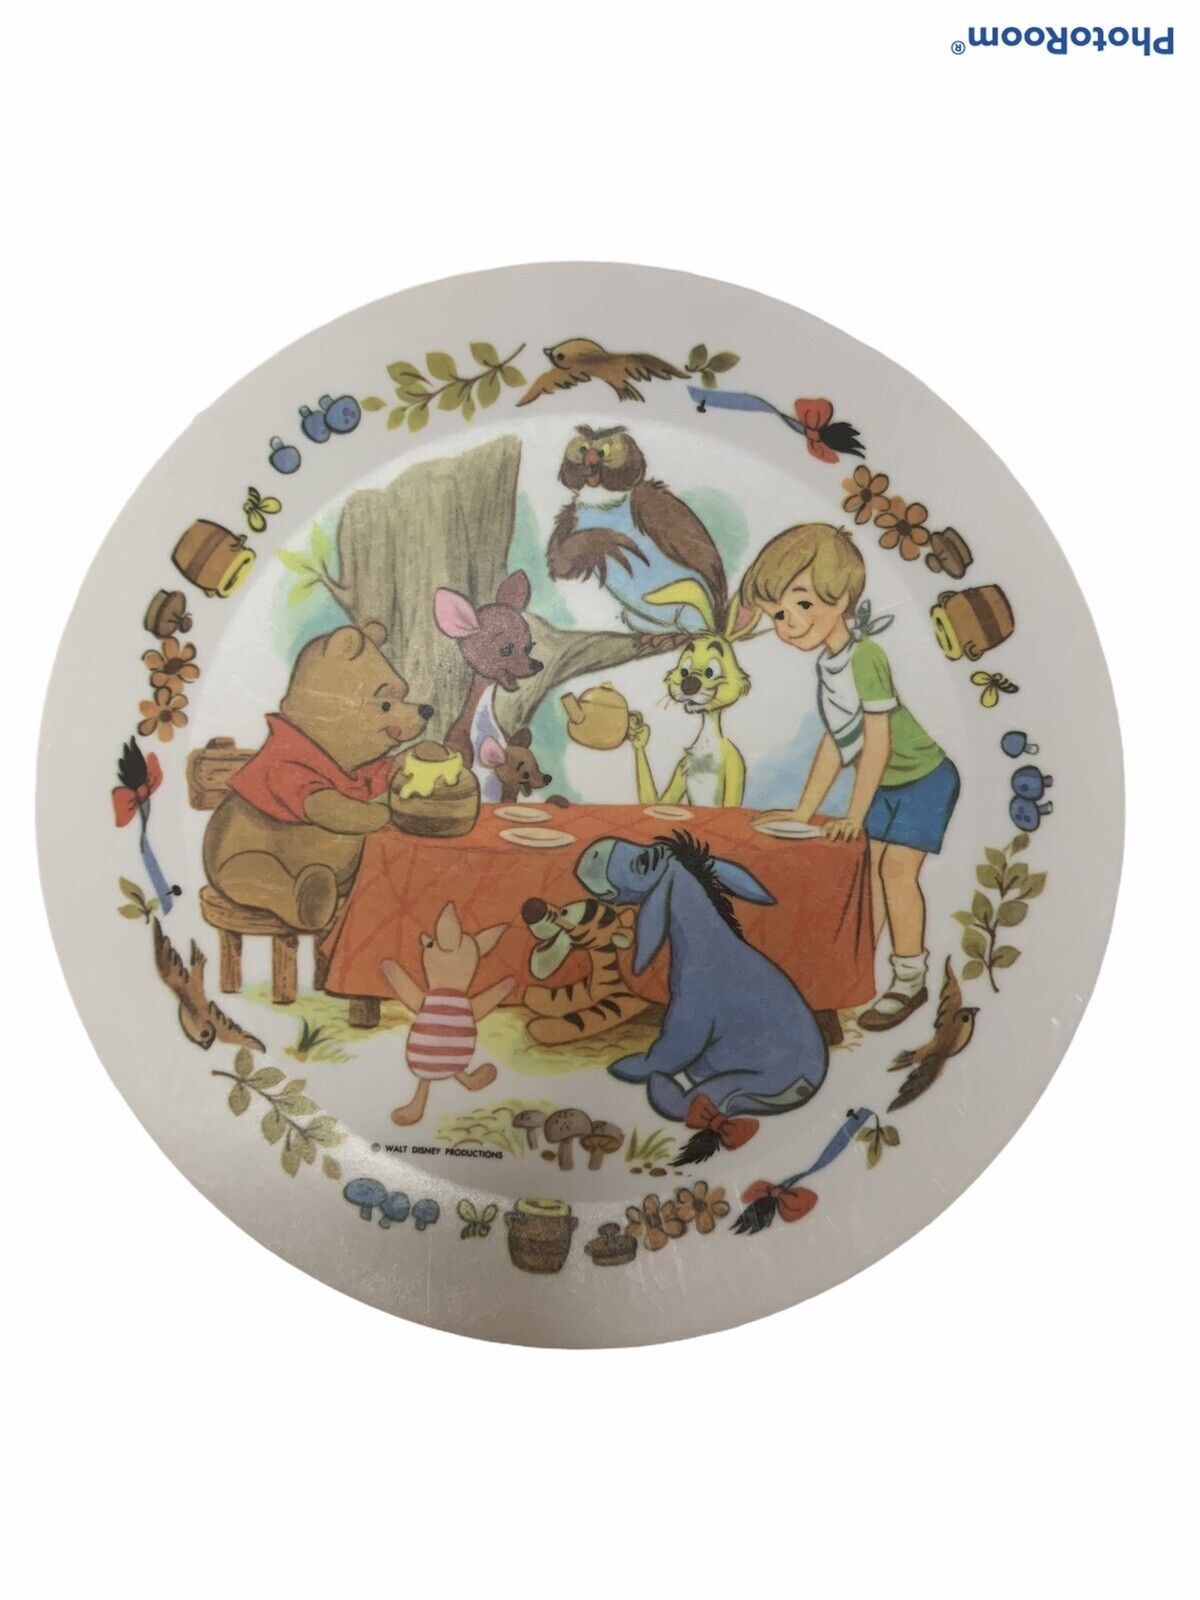 Vintage Walt Disney Productions Winnie The Pooh Plate - National Home Products